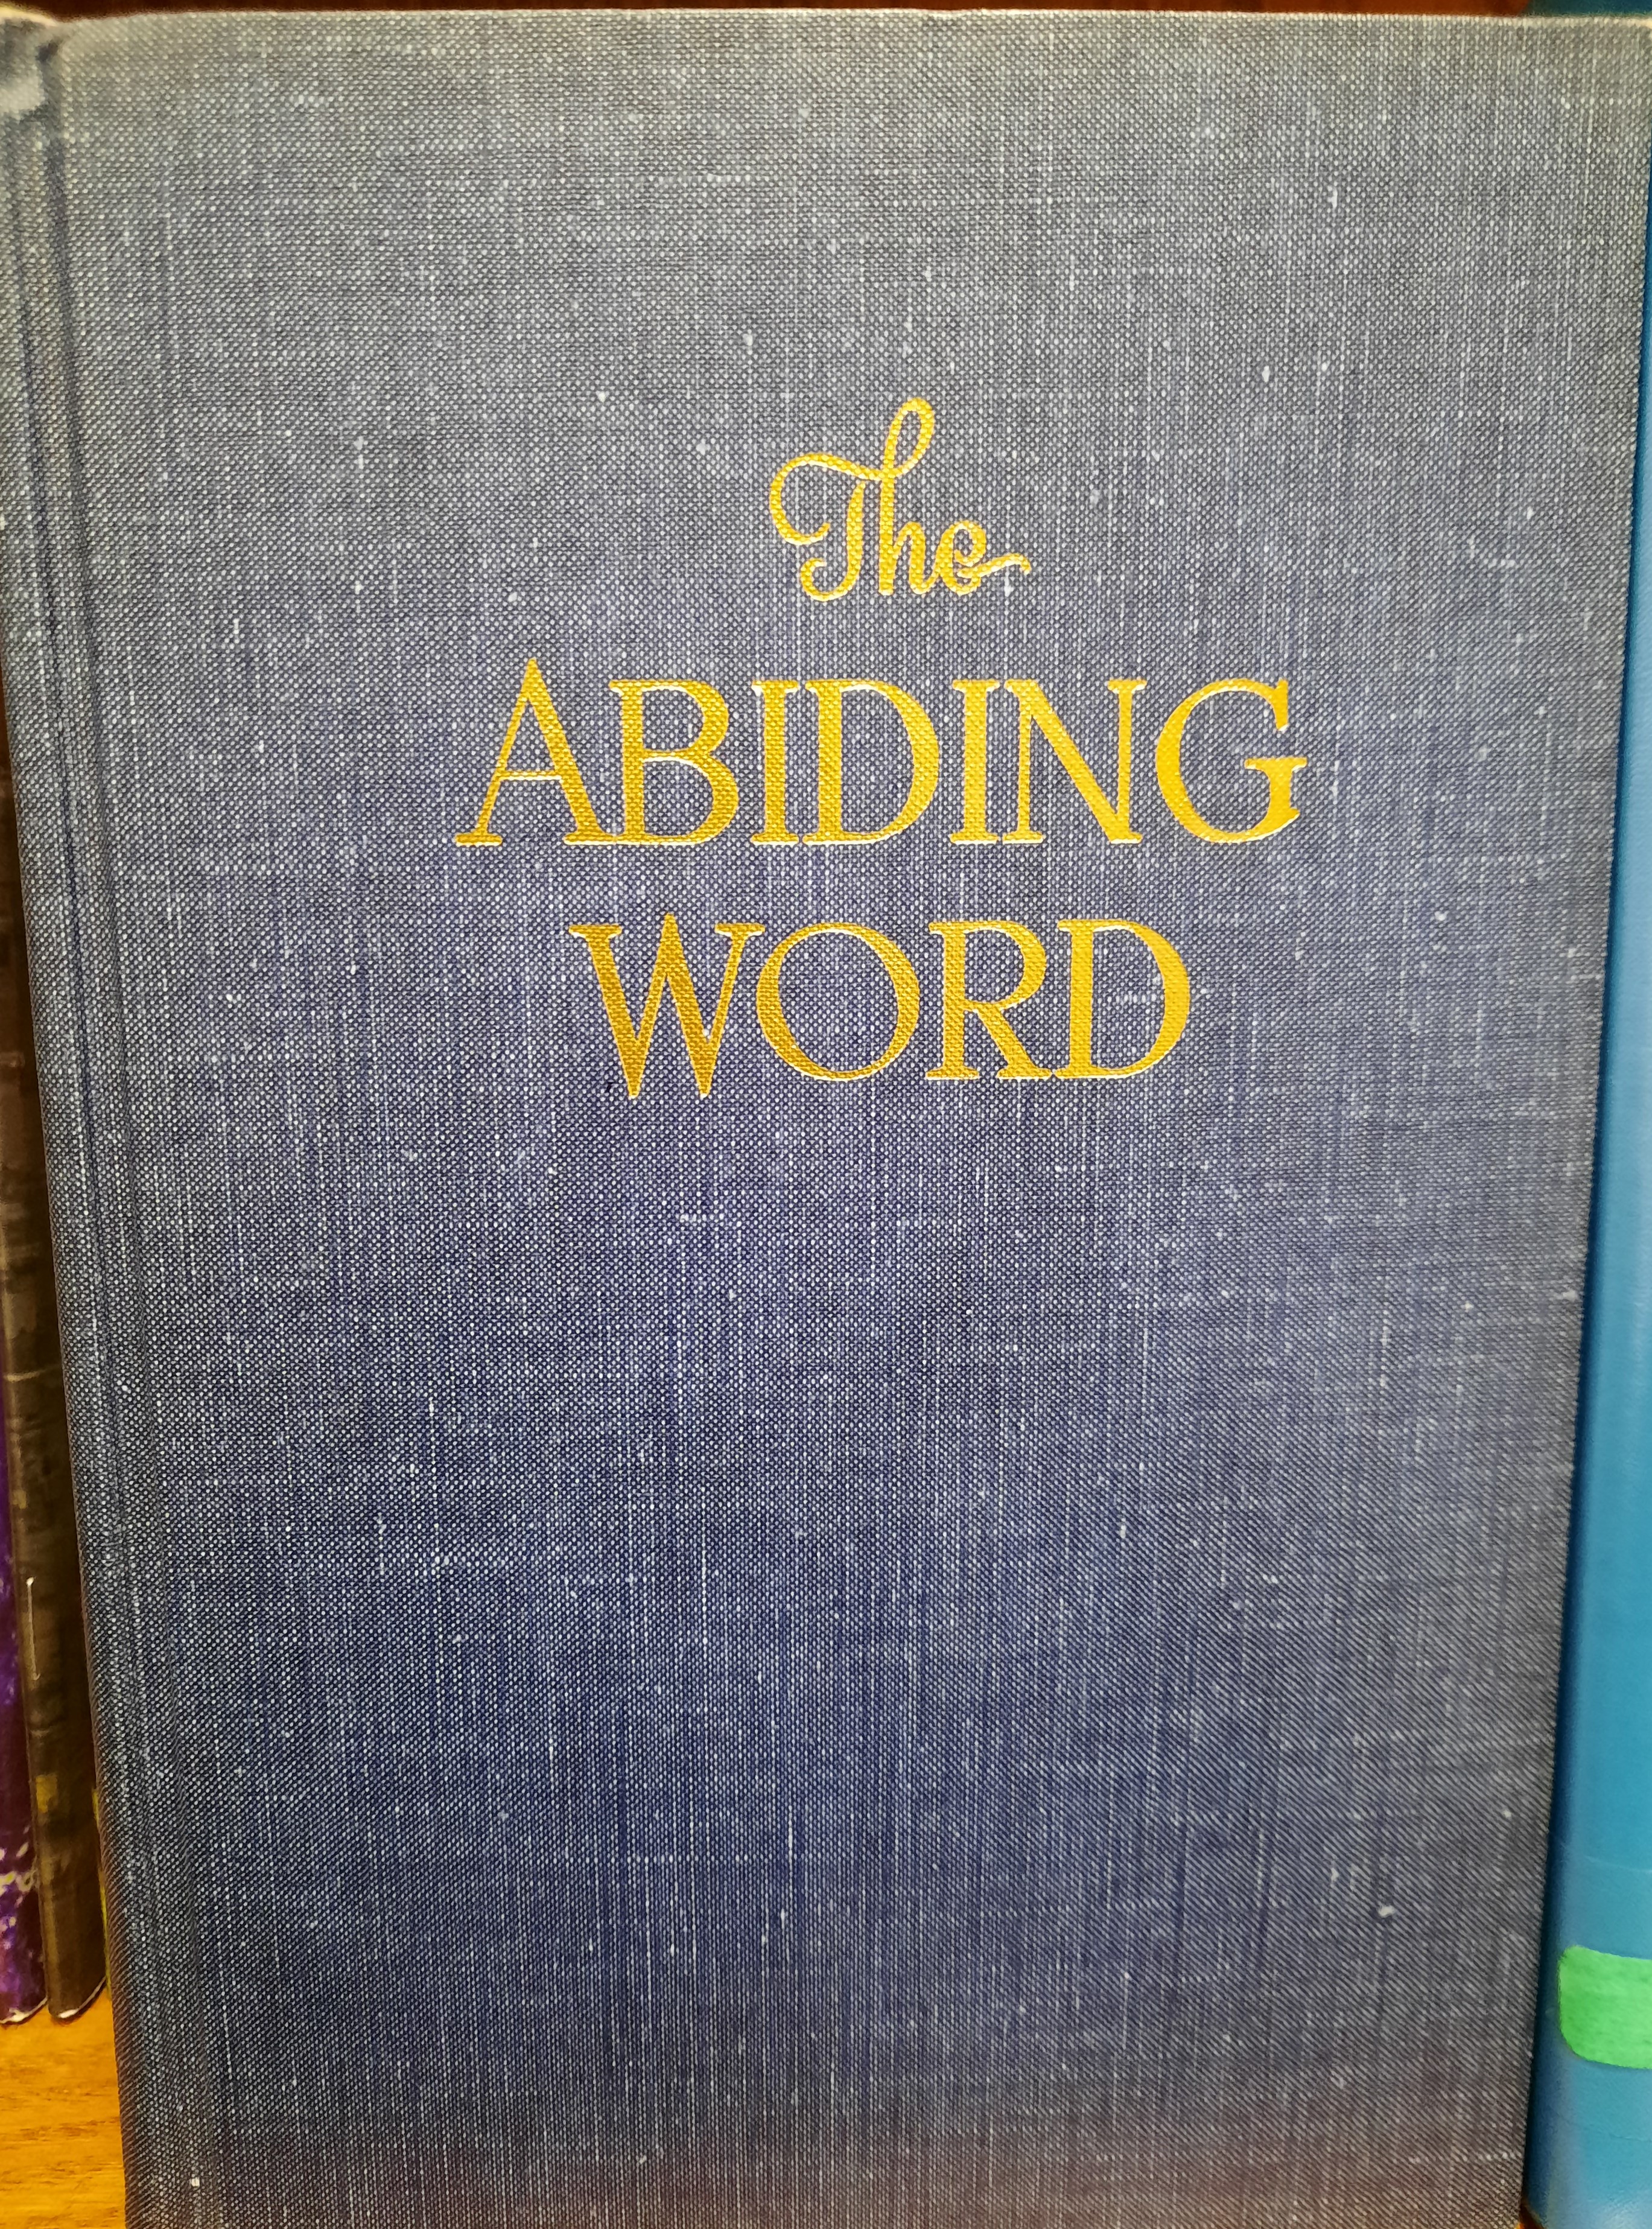 The Abiding Word Vol. One